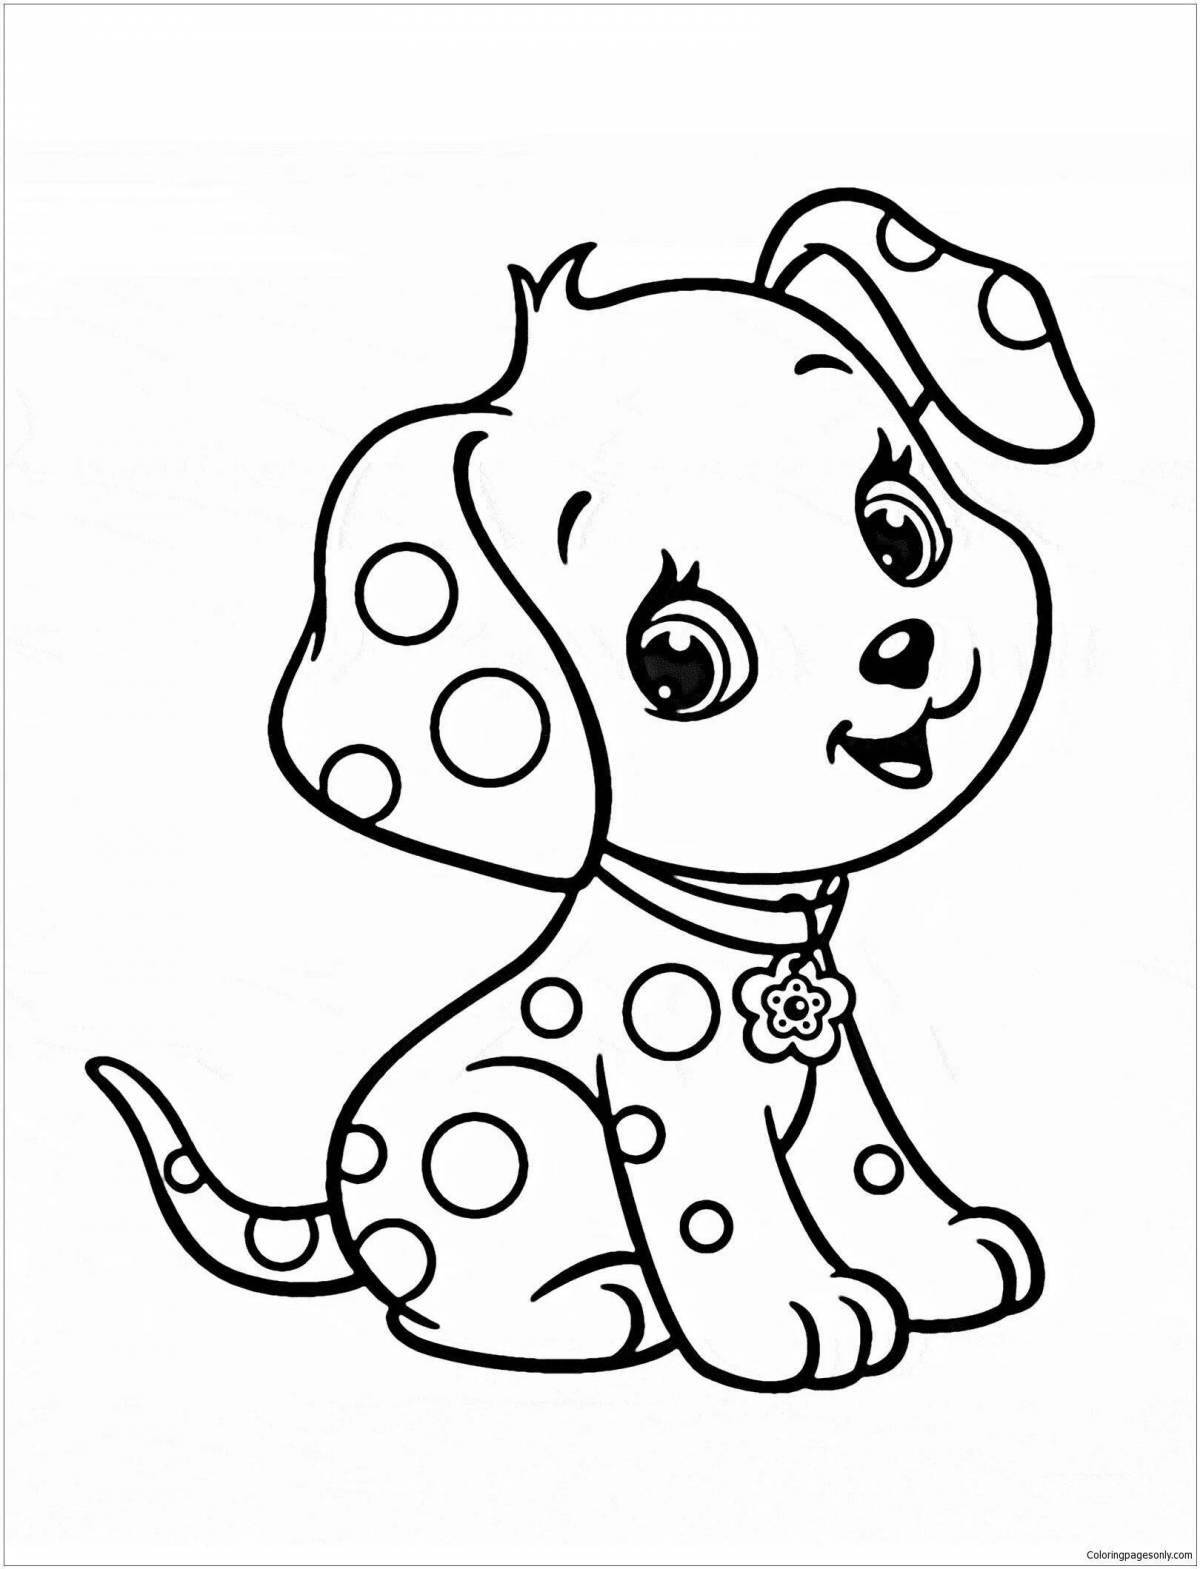 Playful dog coloring book for girls